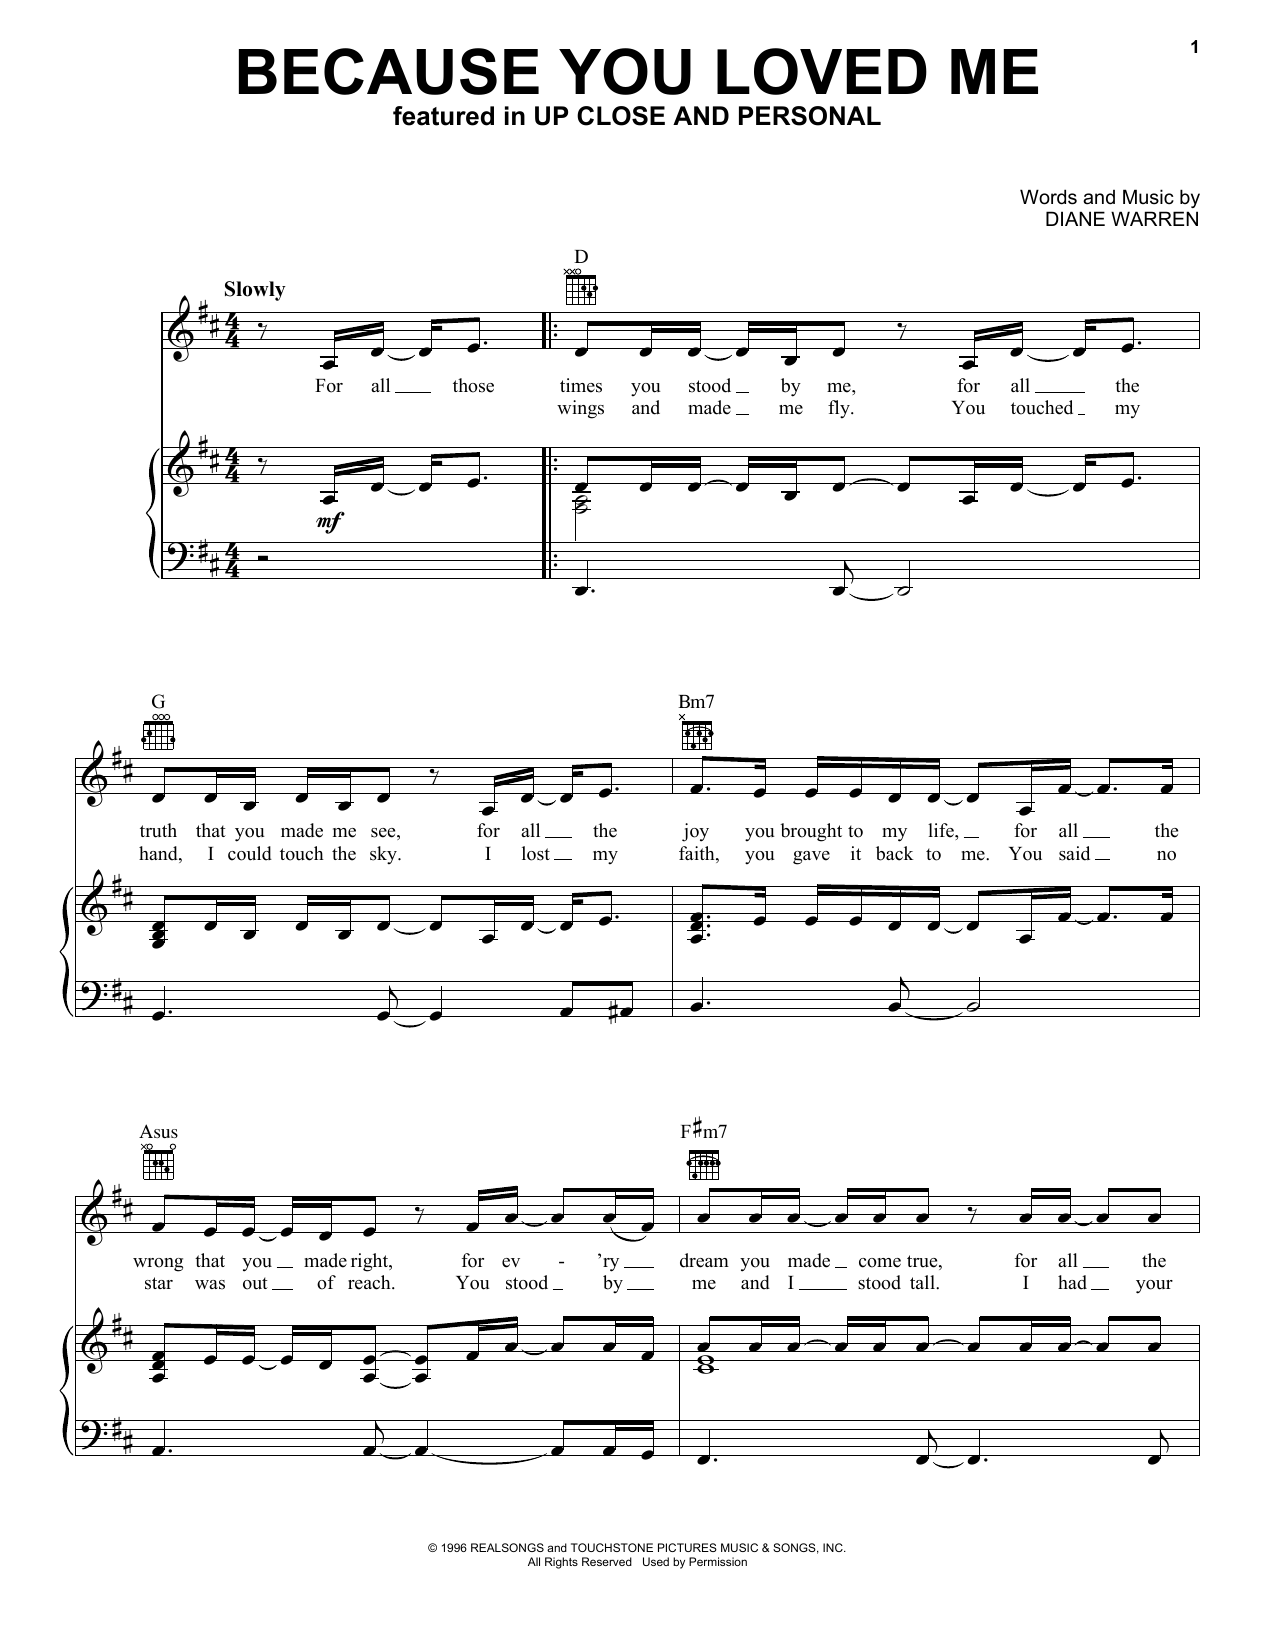 Diane Warren Because You Loved Me sheet music notes and chords. Download Printable PDF.